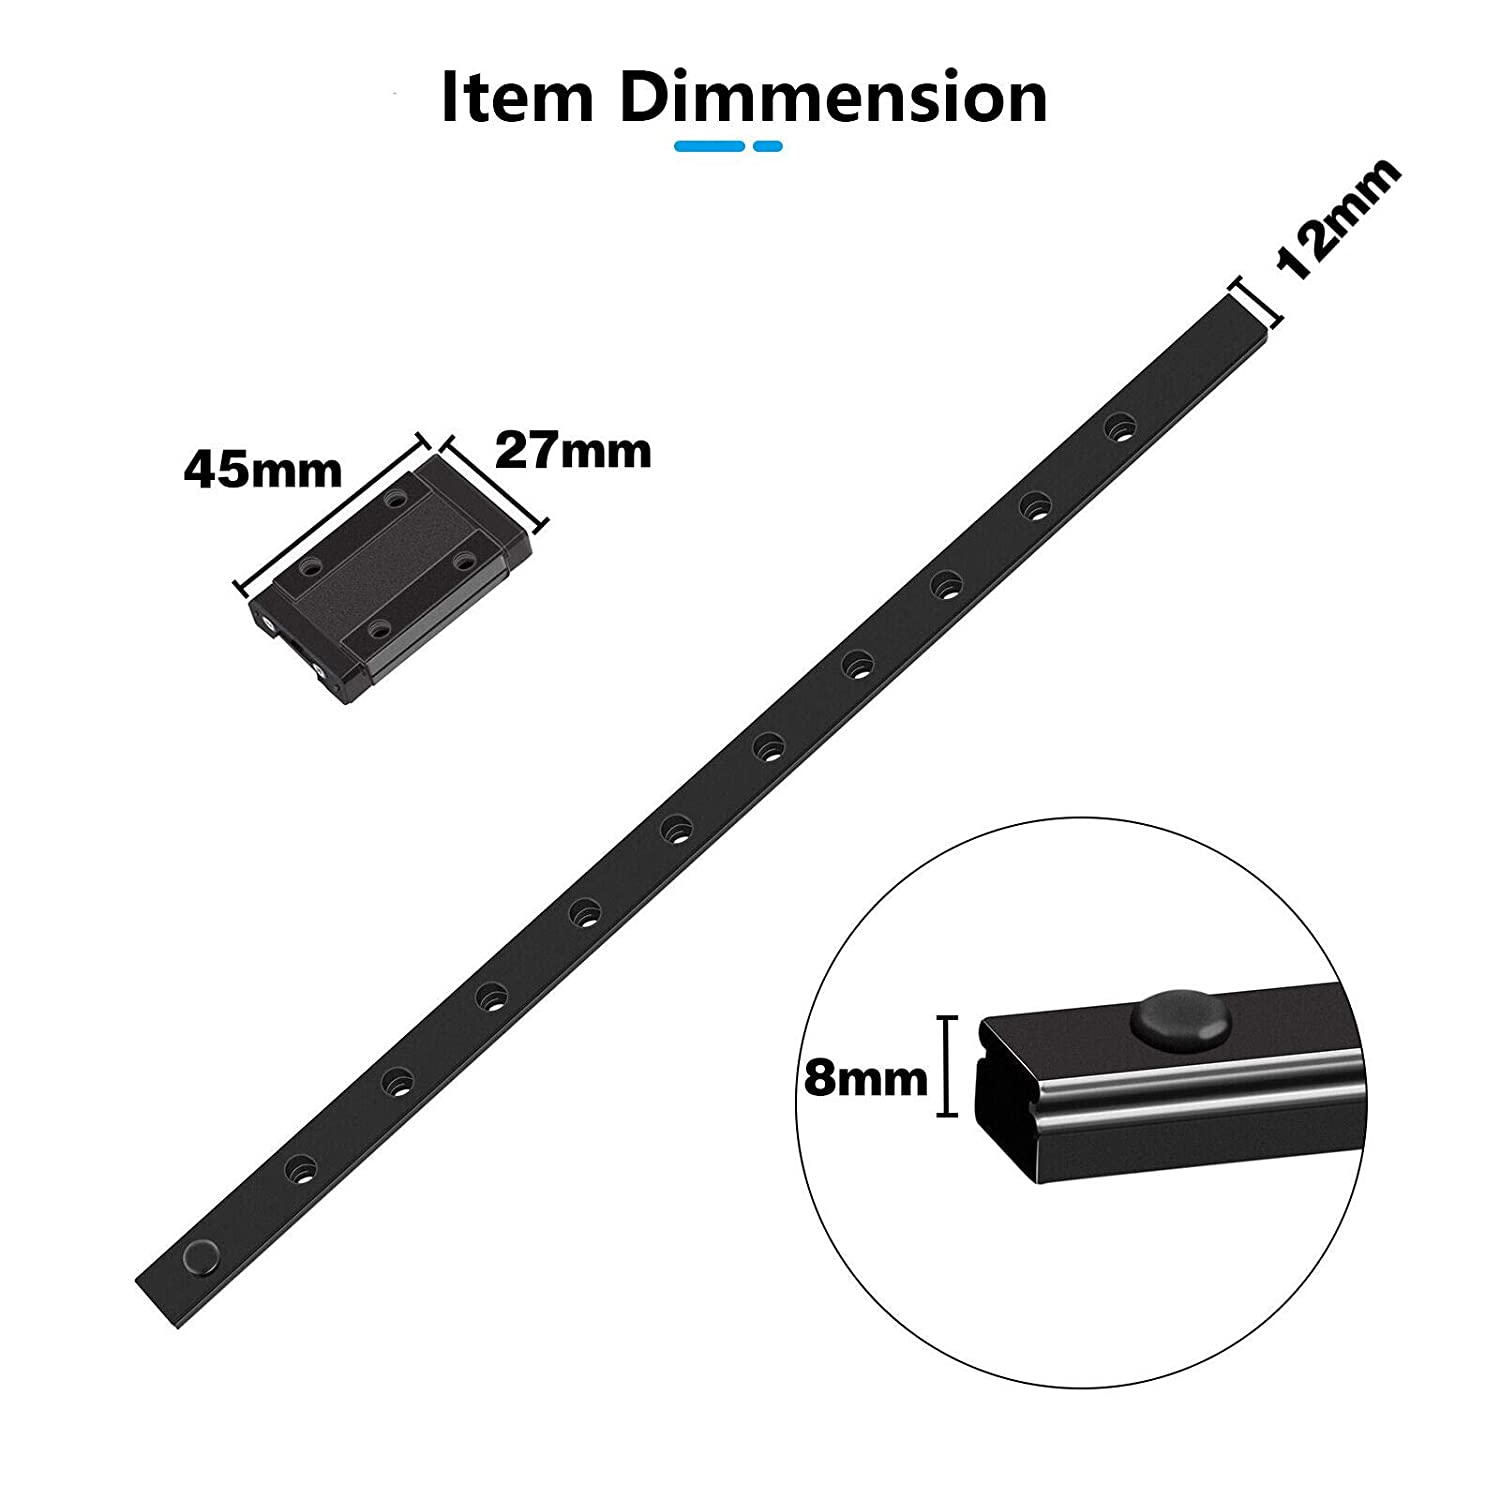 Black MGN12 Linear Sliding Guide Rail 400mm with MGN12H Bearing Steel Carriage Block for CoreXY DIY 3D Printer and CNC Machines